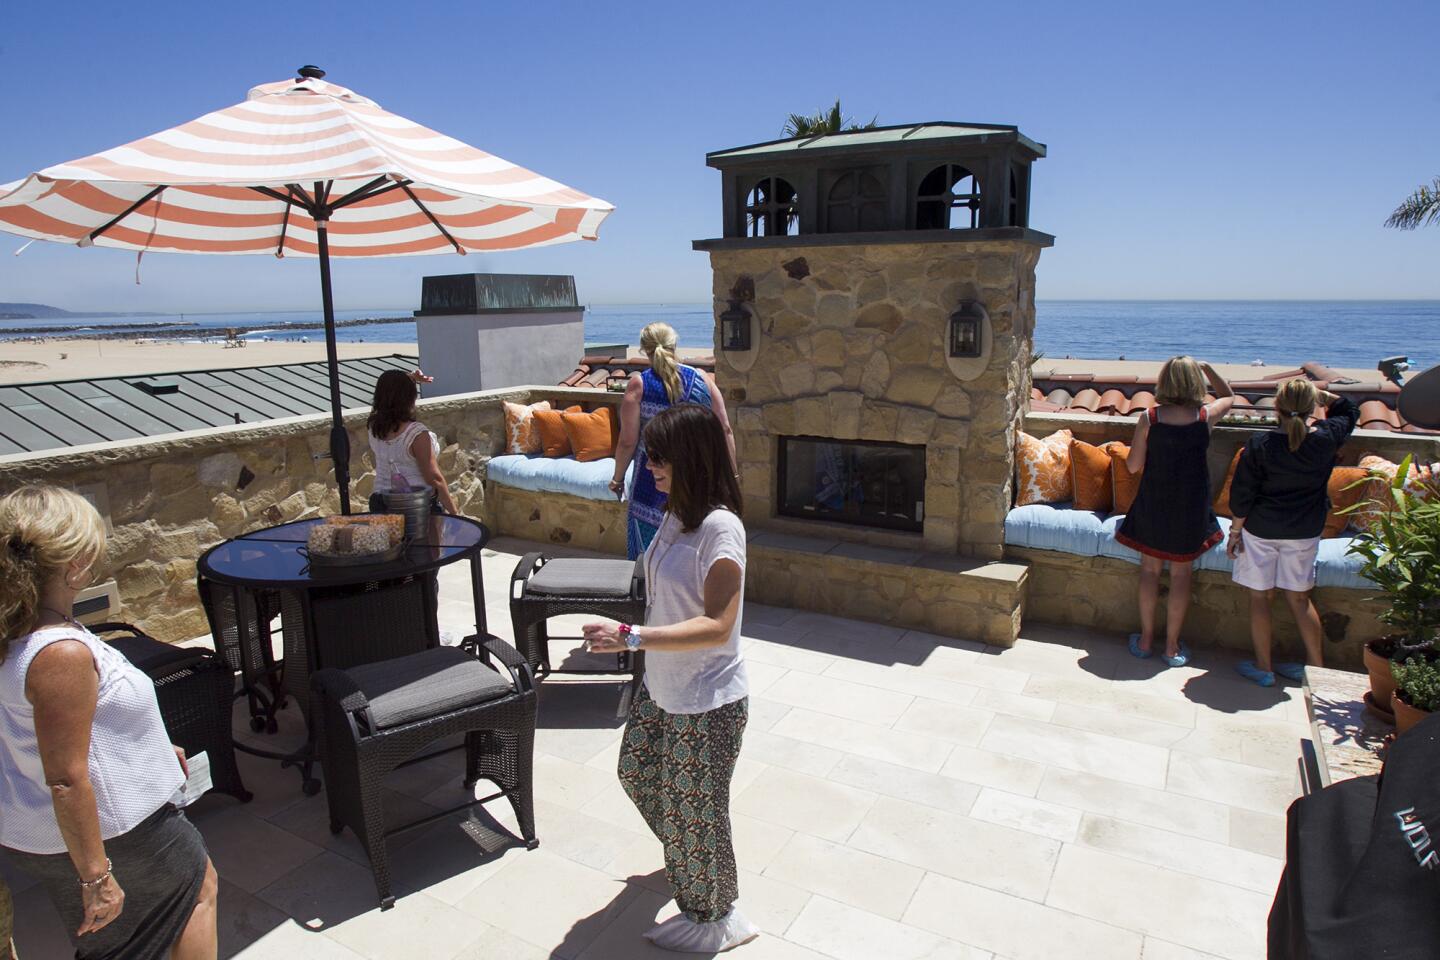 Guests take a look at the view from the rooftop patio at the Buntmann Residence at 2054 East Oceanfront during the Newport Harbor Home tour on Thursday, May 15. (Scott Smeltzer - Daily Pilot)